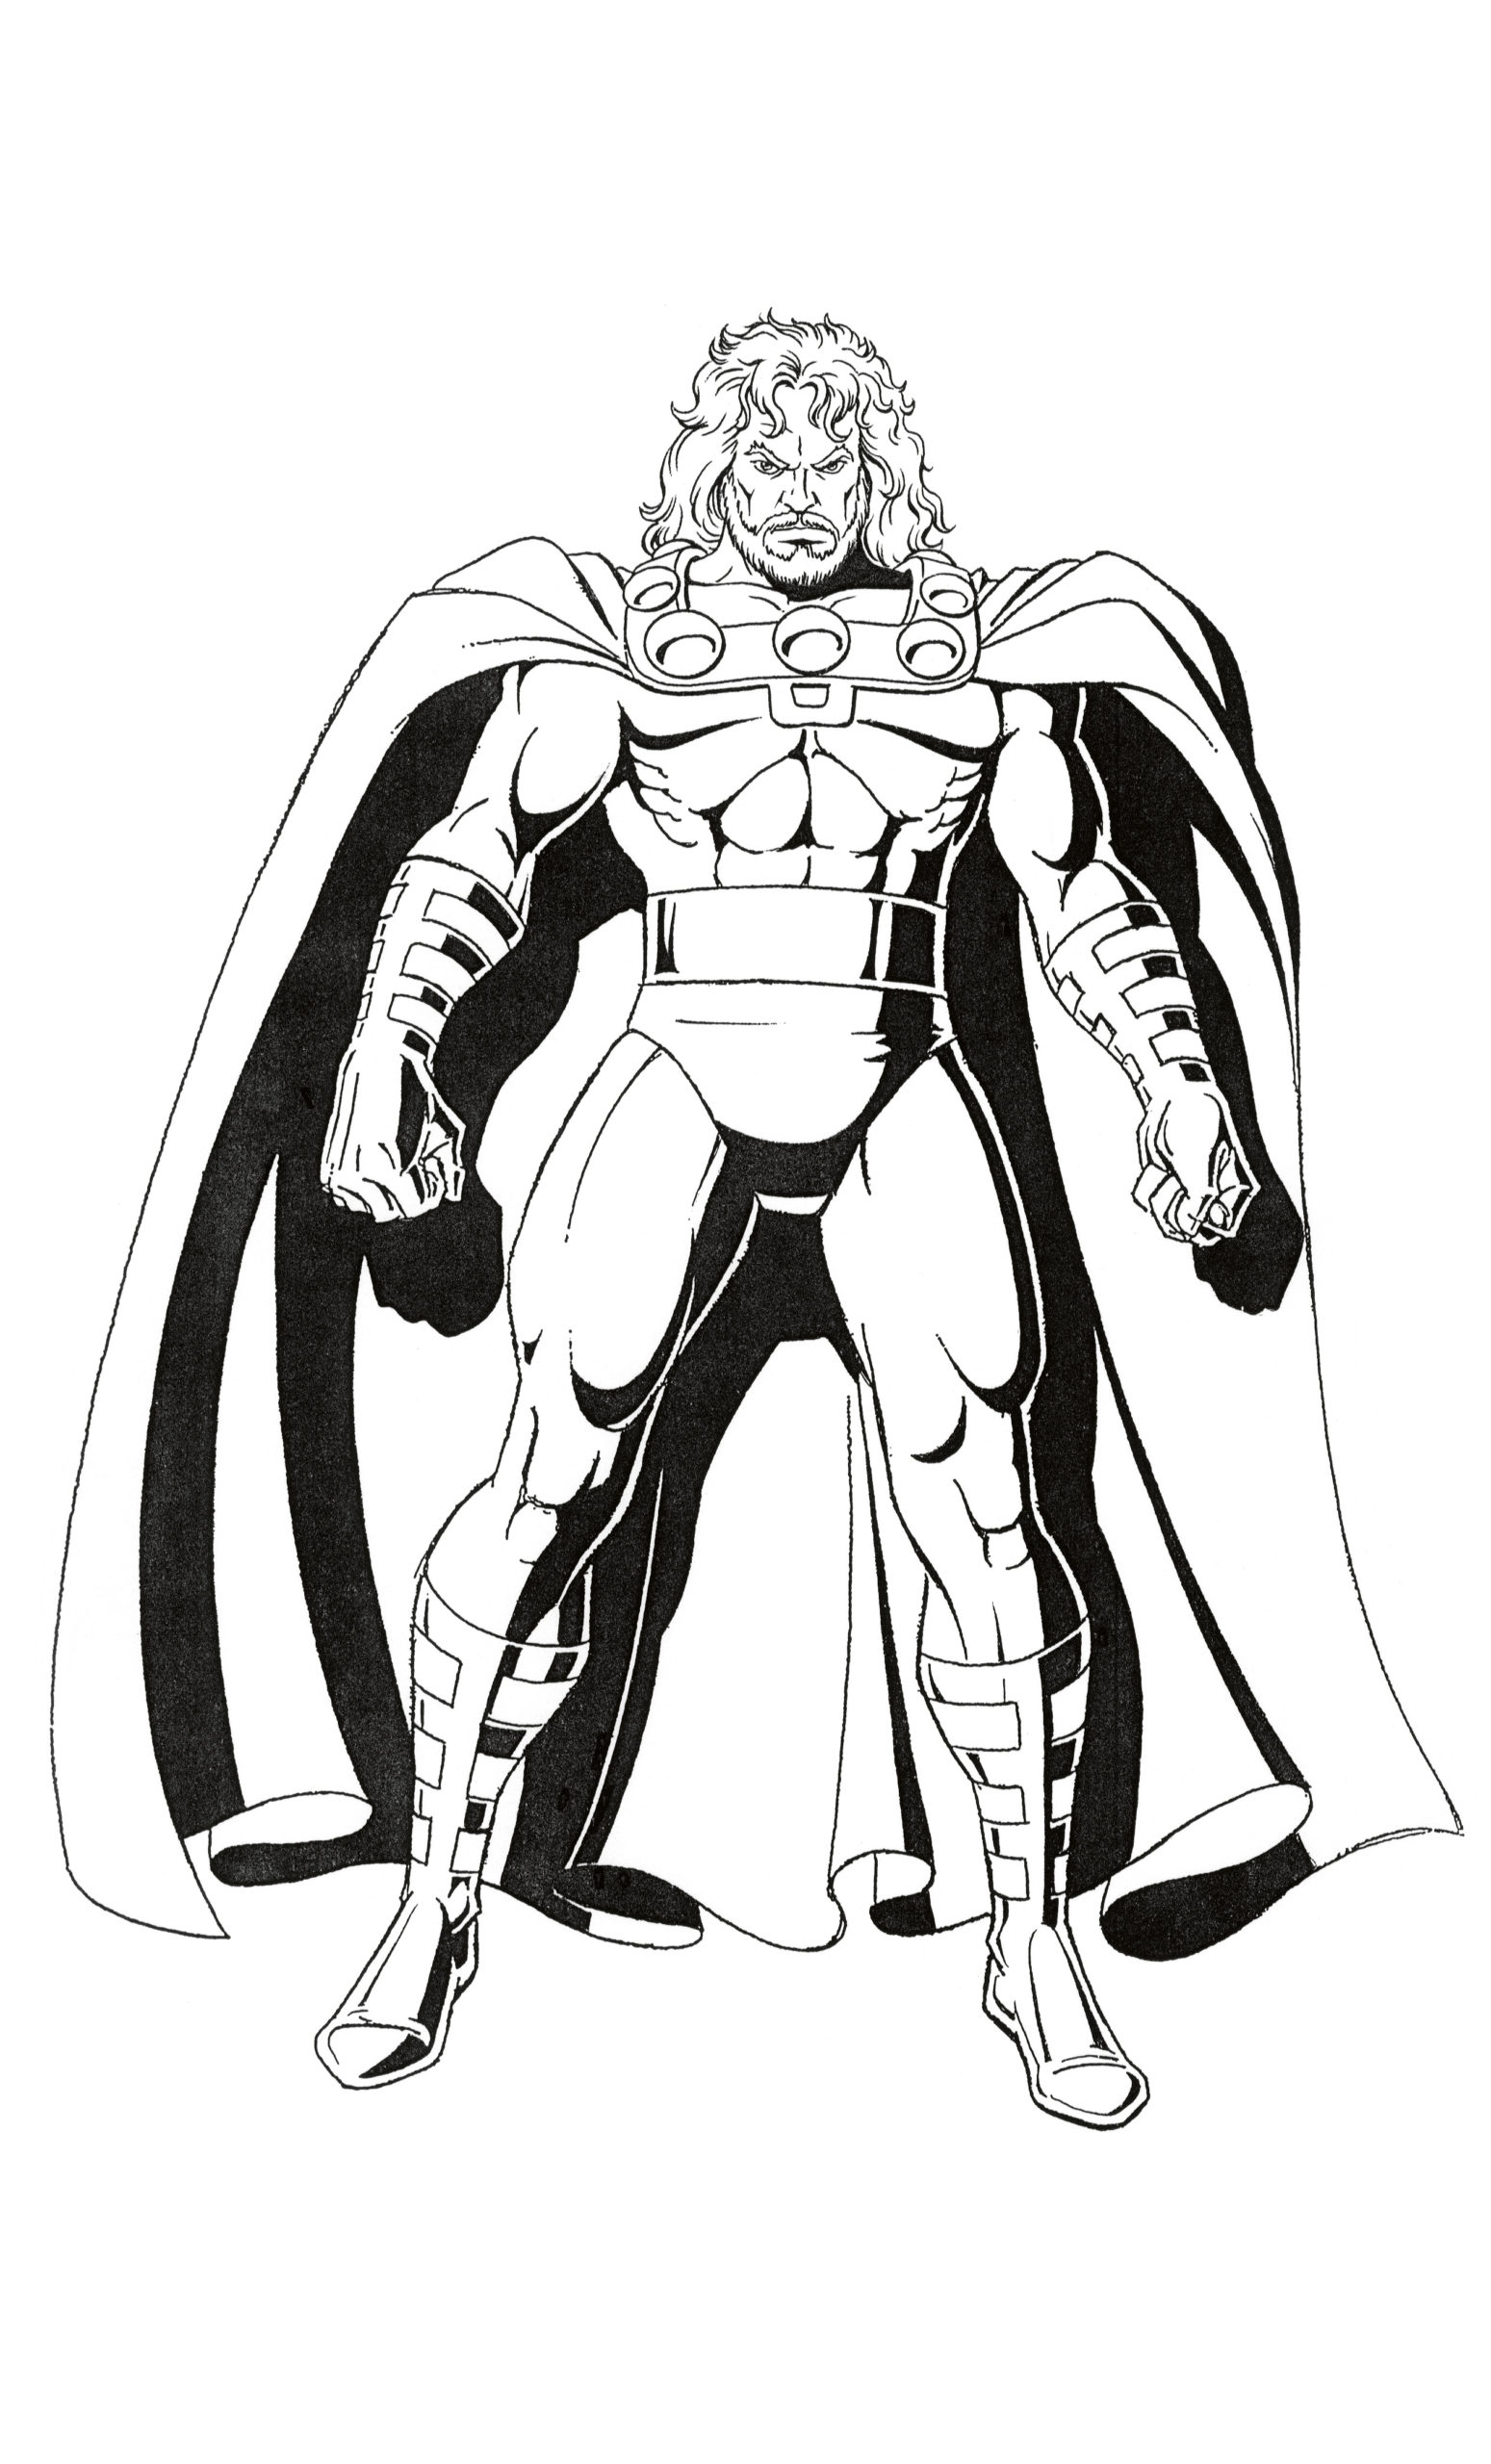 Magneto in his signature outfit. (Illustration: Mark Lewis, Abrams)